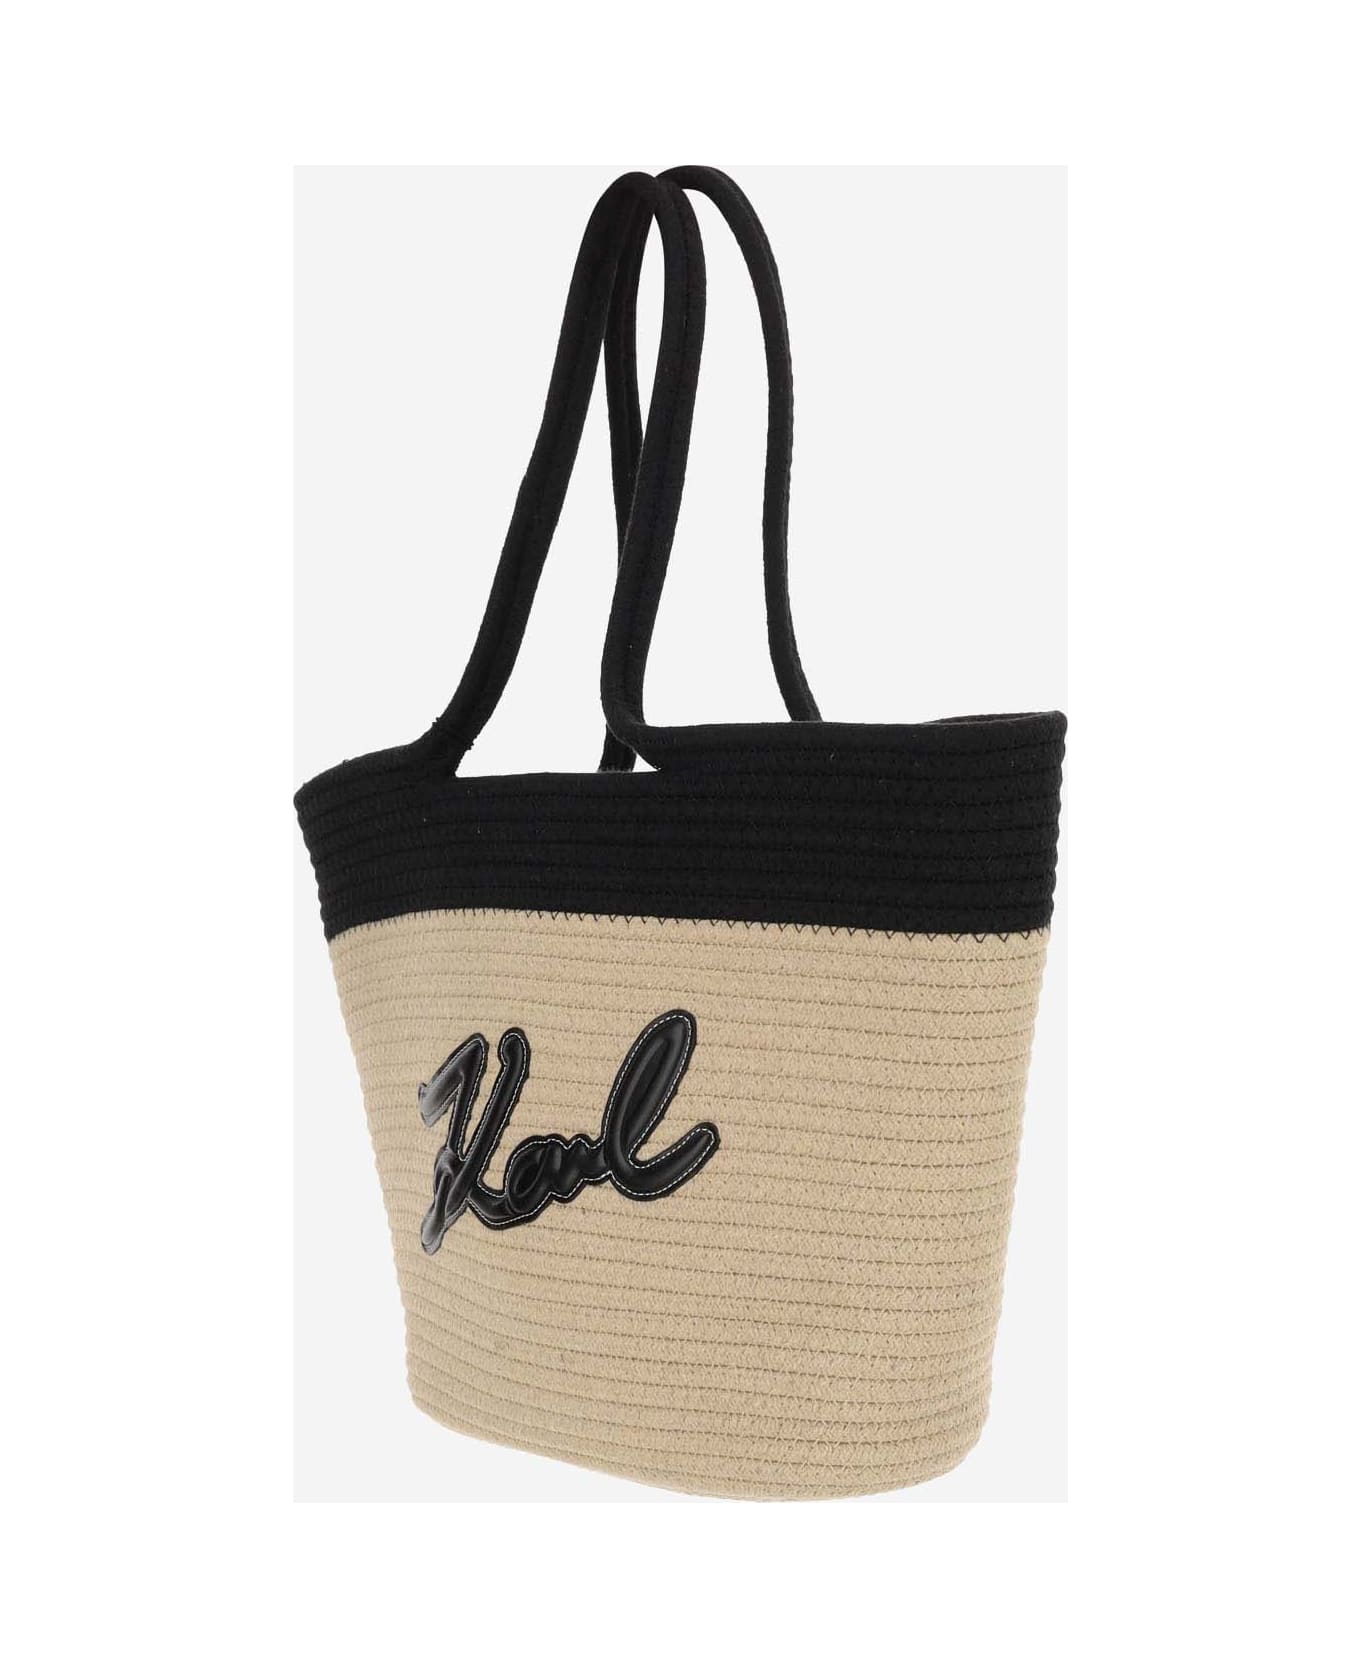 Karl Lagerfeld Fabric Tote Bag With Logo - Black